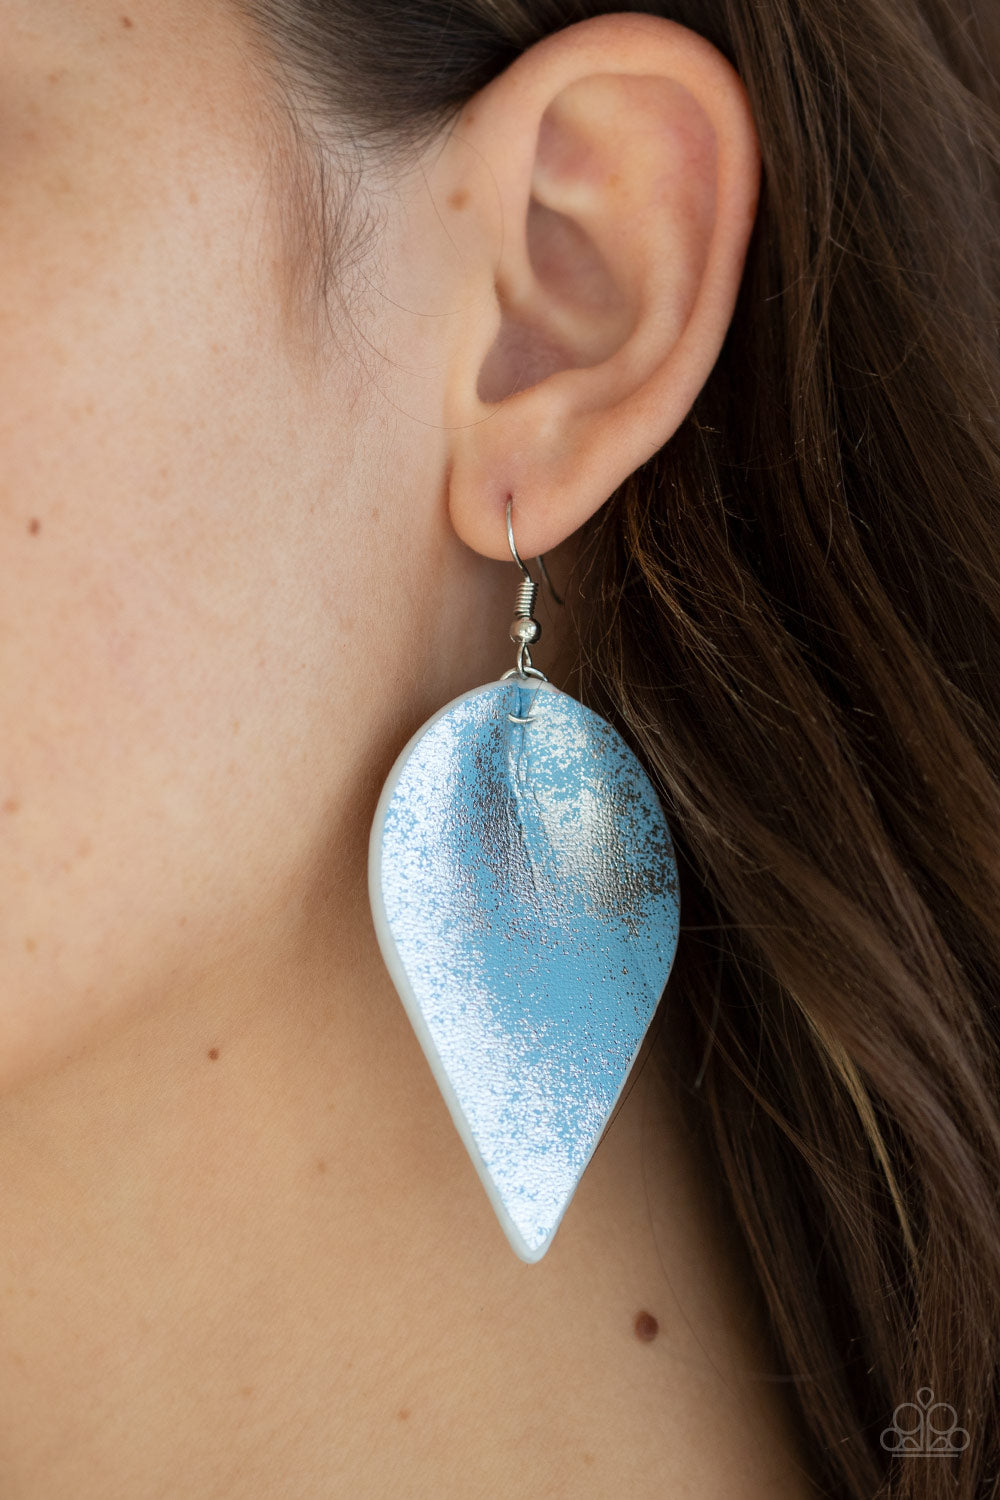 Paparazzi Accessories - Enchanted Shimmer - Blue Earrings